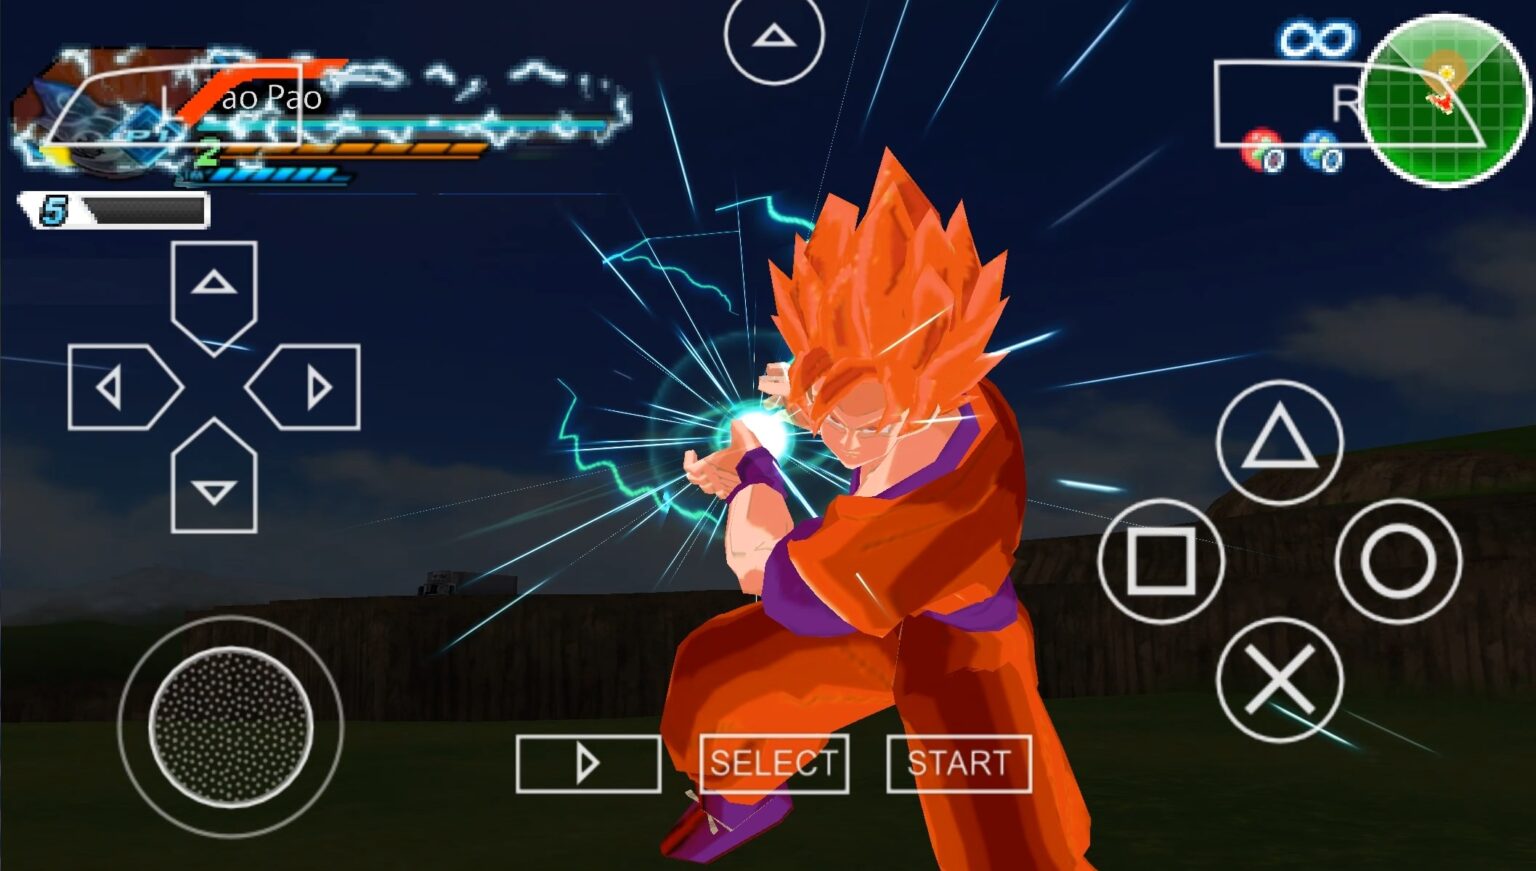 dragon ball z psp games for android